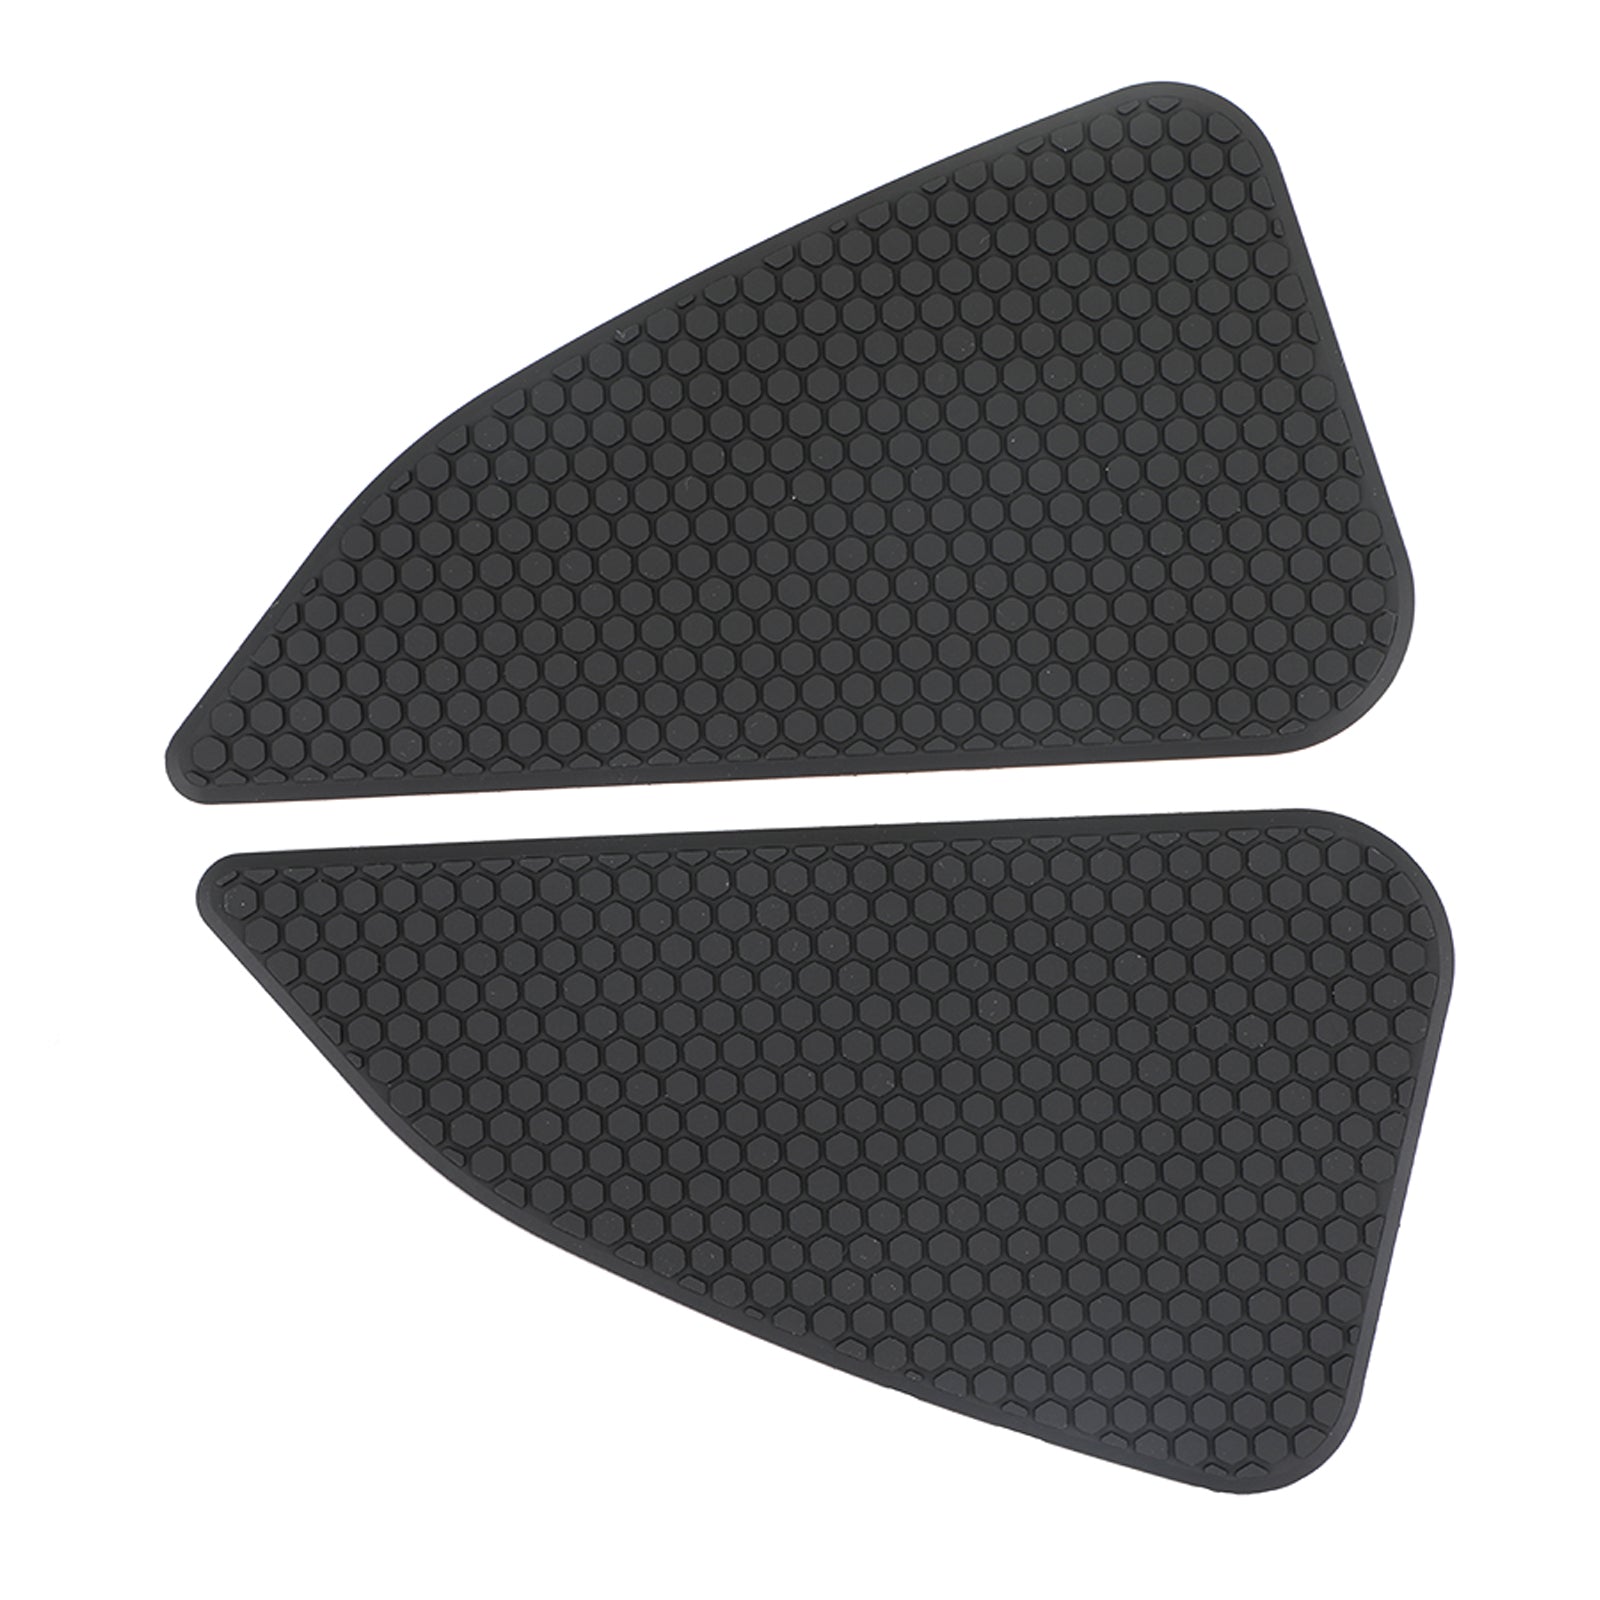 Tank Traction Grips Boot Guards for Ducati Scrambler 400 Sixty2 2016-2019